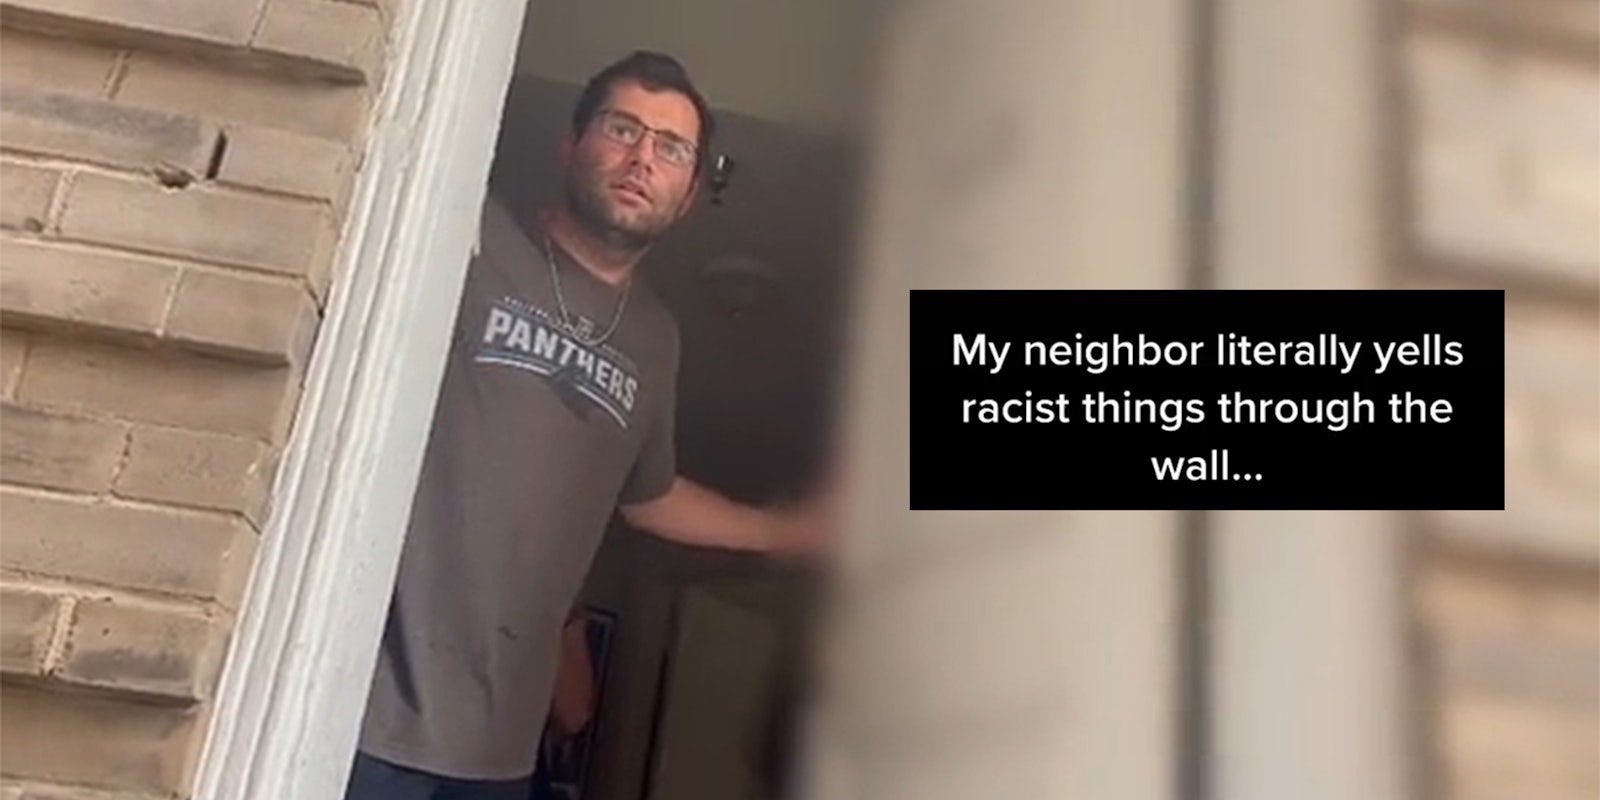 man opening front door with caption 'My neighbor literally yells racist things through the wall...'